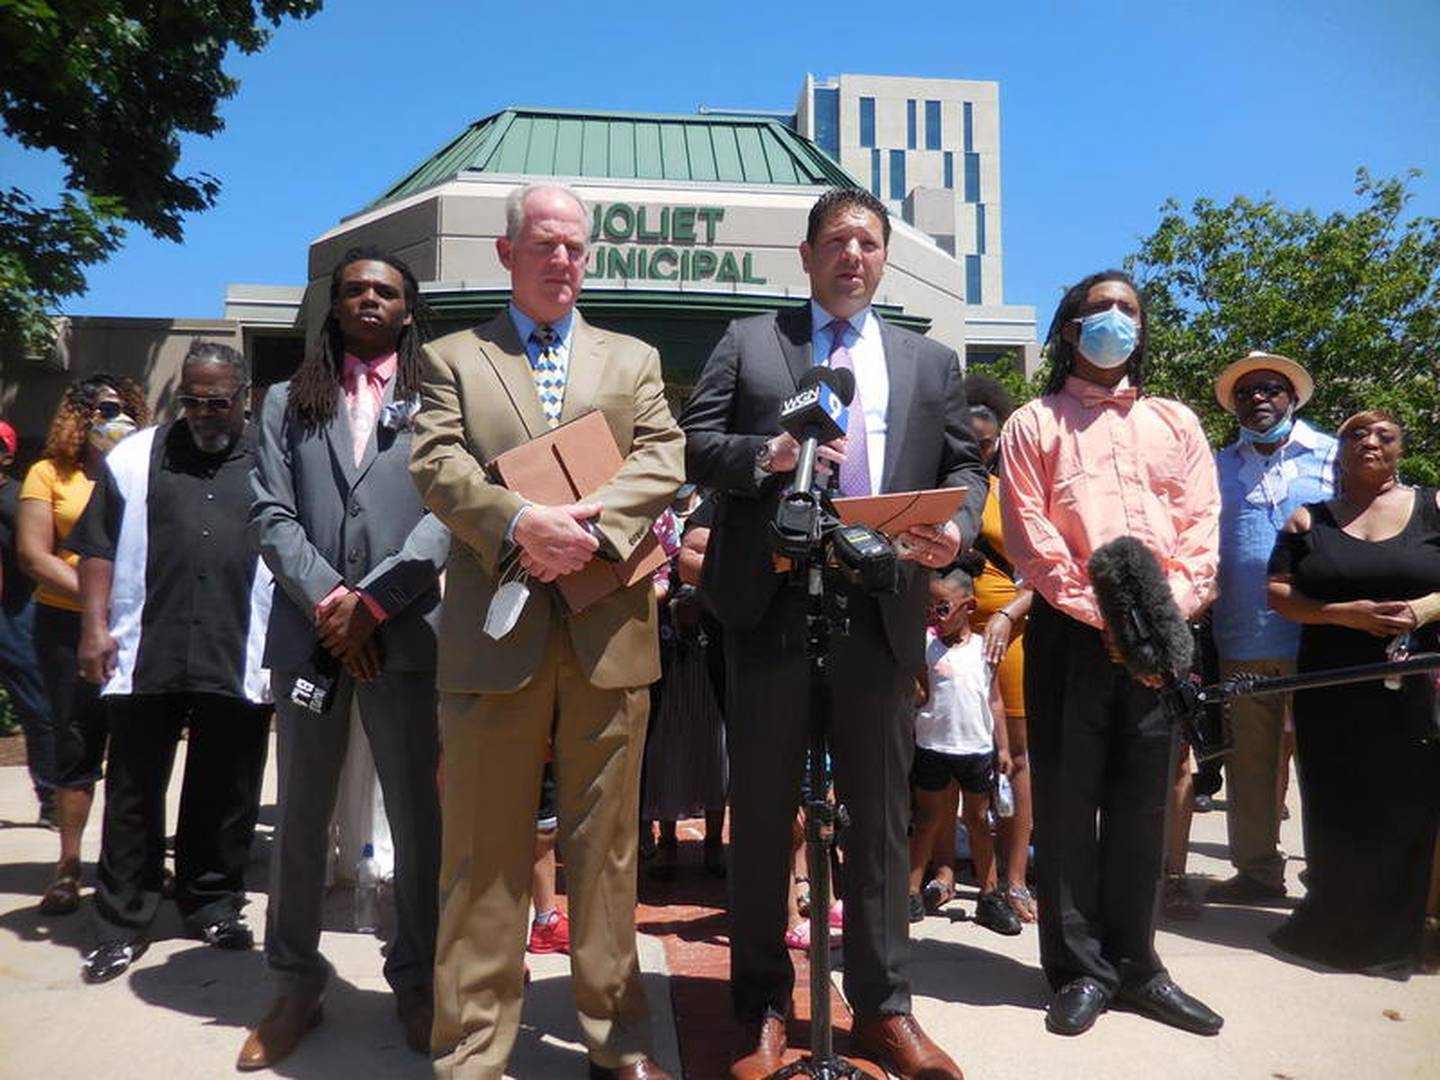 Attorneys Lawrence X. O'Reilly (left) and Michael E. Baker stand in the foreground, flanked by their clients, Victor Williams (left) and Jamal Smith at a news conference outside Joliet City Hall on Monday. Williams and Smith, who are brothers, were arrested after Williams was confronted and grabbed by Joliet Mayor Bob O'Dekirk at a May 31 Black Lives Matter demonstration.